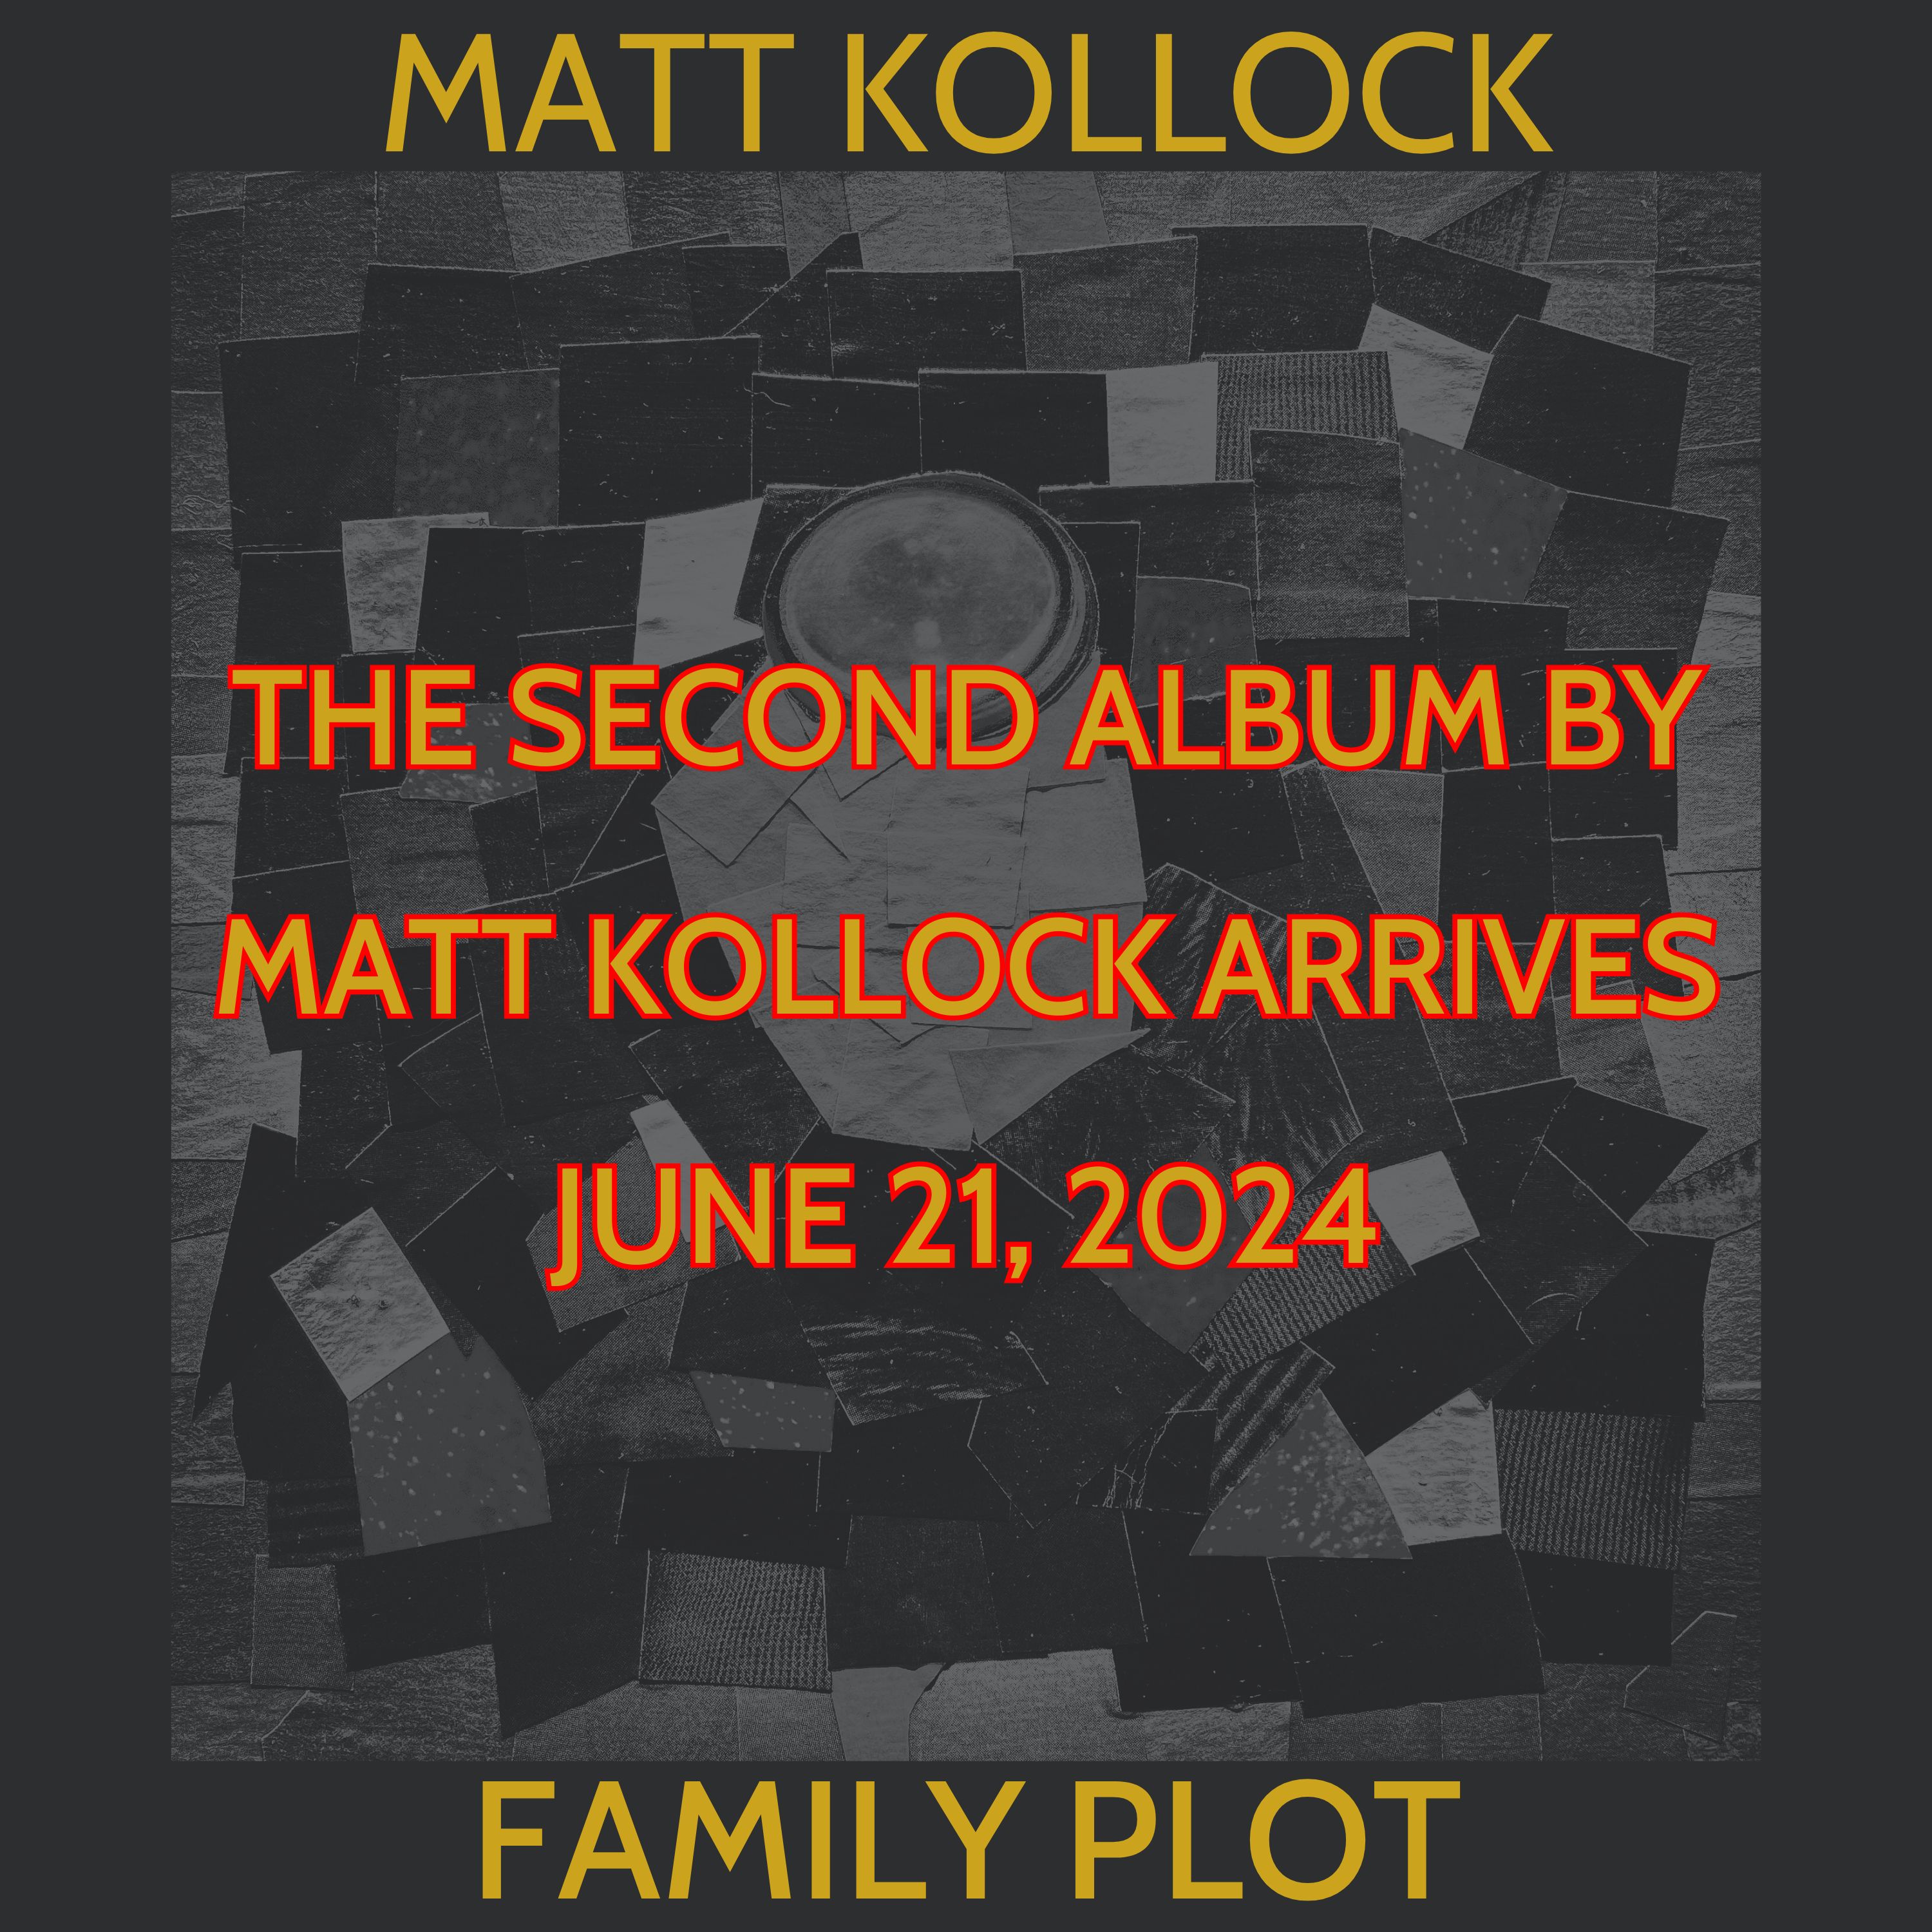 A modified version of the album cover for Matt Kollock's 'Family Plot,' featuring text announcing the album's release on June 21, 2024